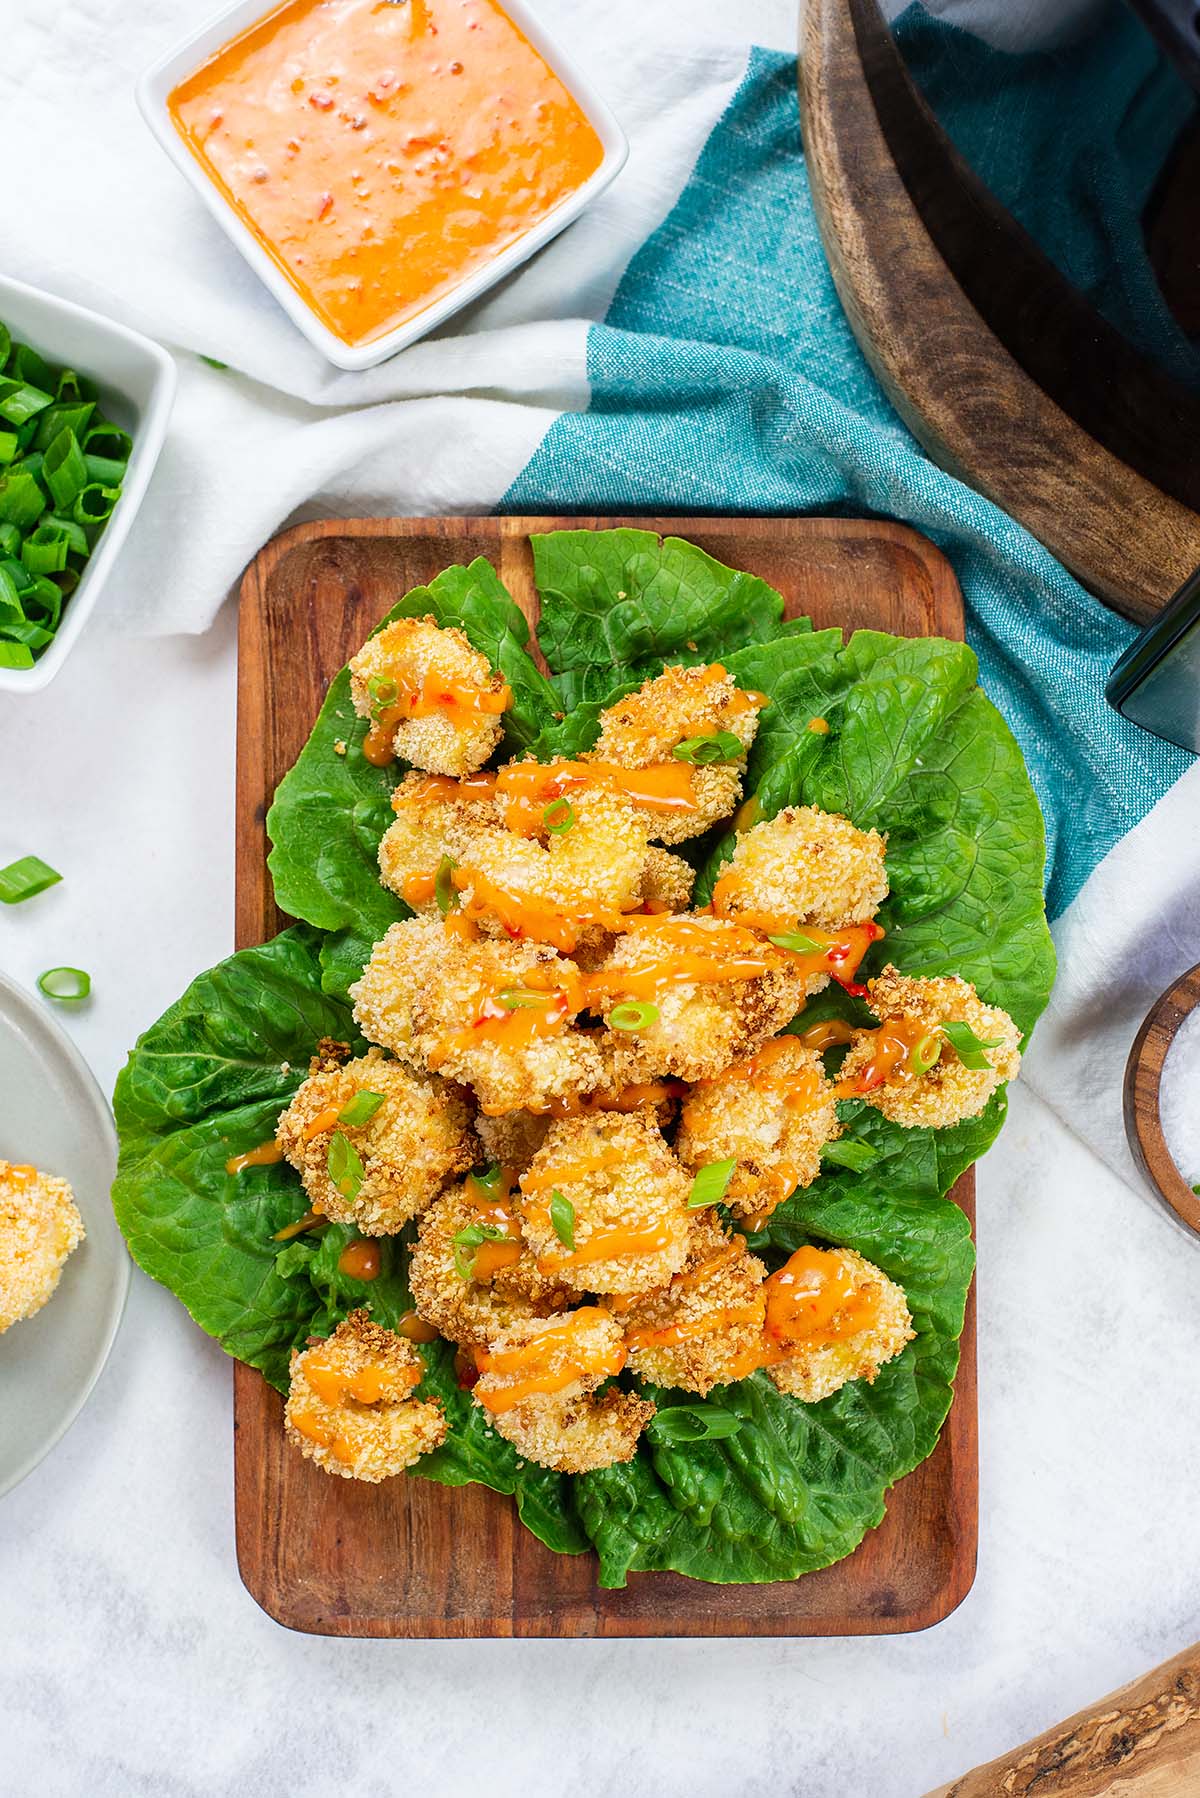 Overhead view of shrimp with bang bang sauce on a lettuce leaf.